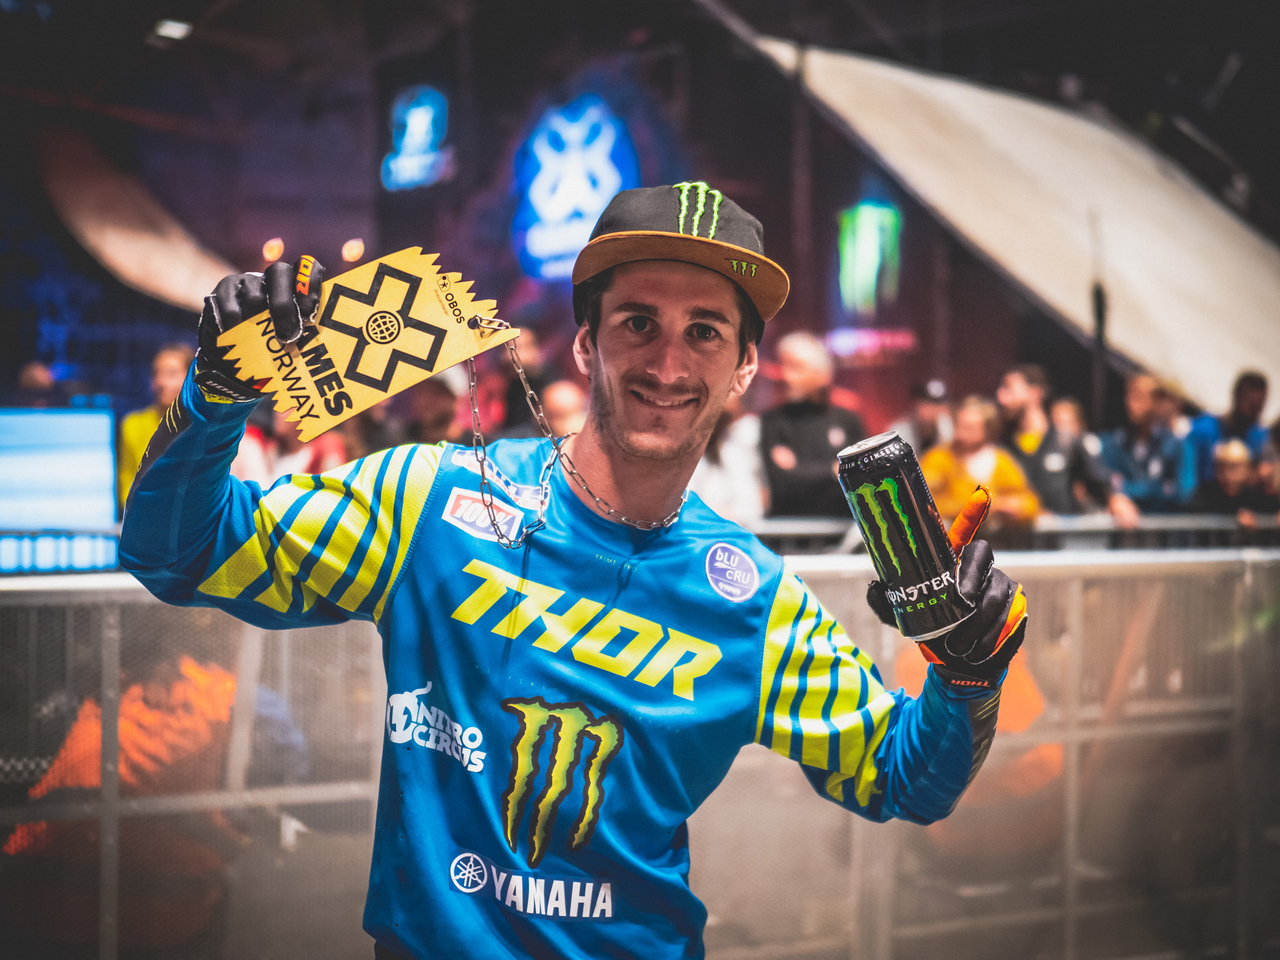 Monster Energy's Jarryd McNeil Will Compete in Moto X Best Whip and Moto X Quarterpipe High at X Games California 2023 in Ventura, California